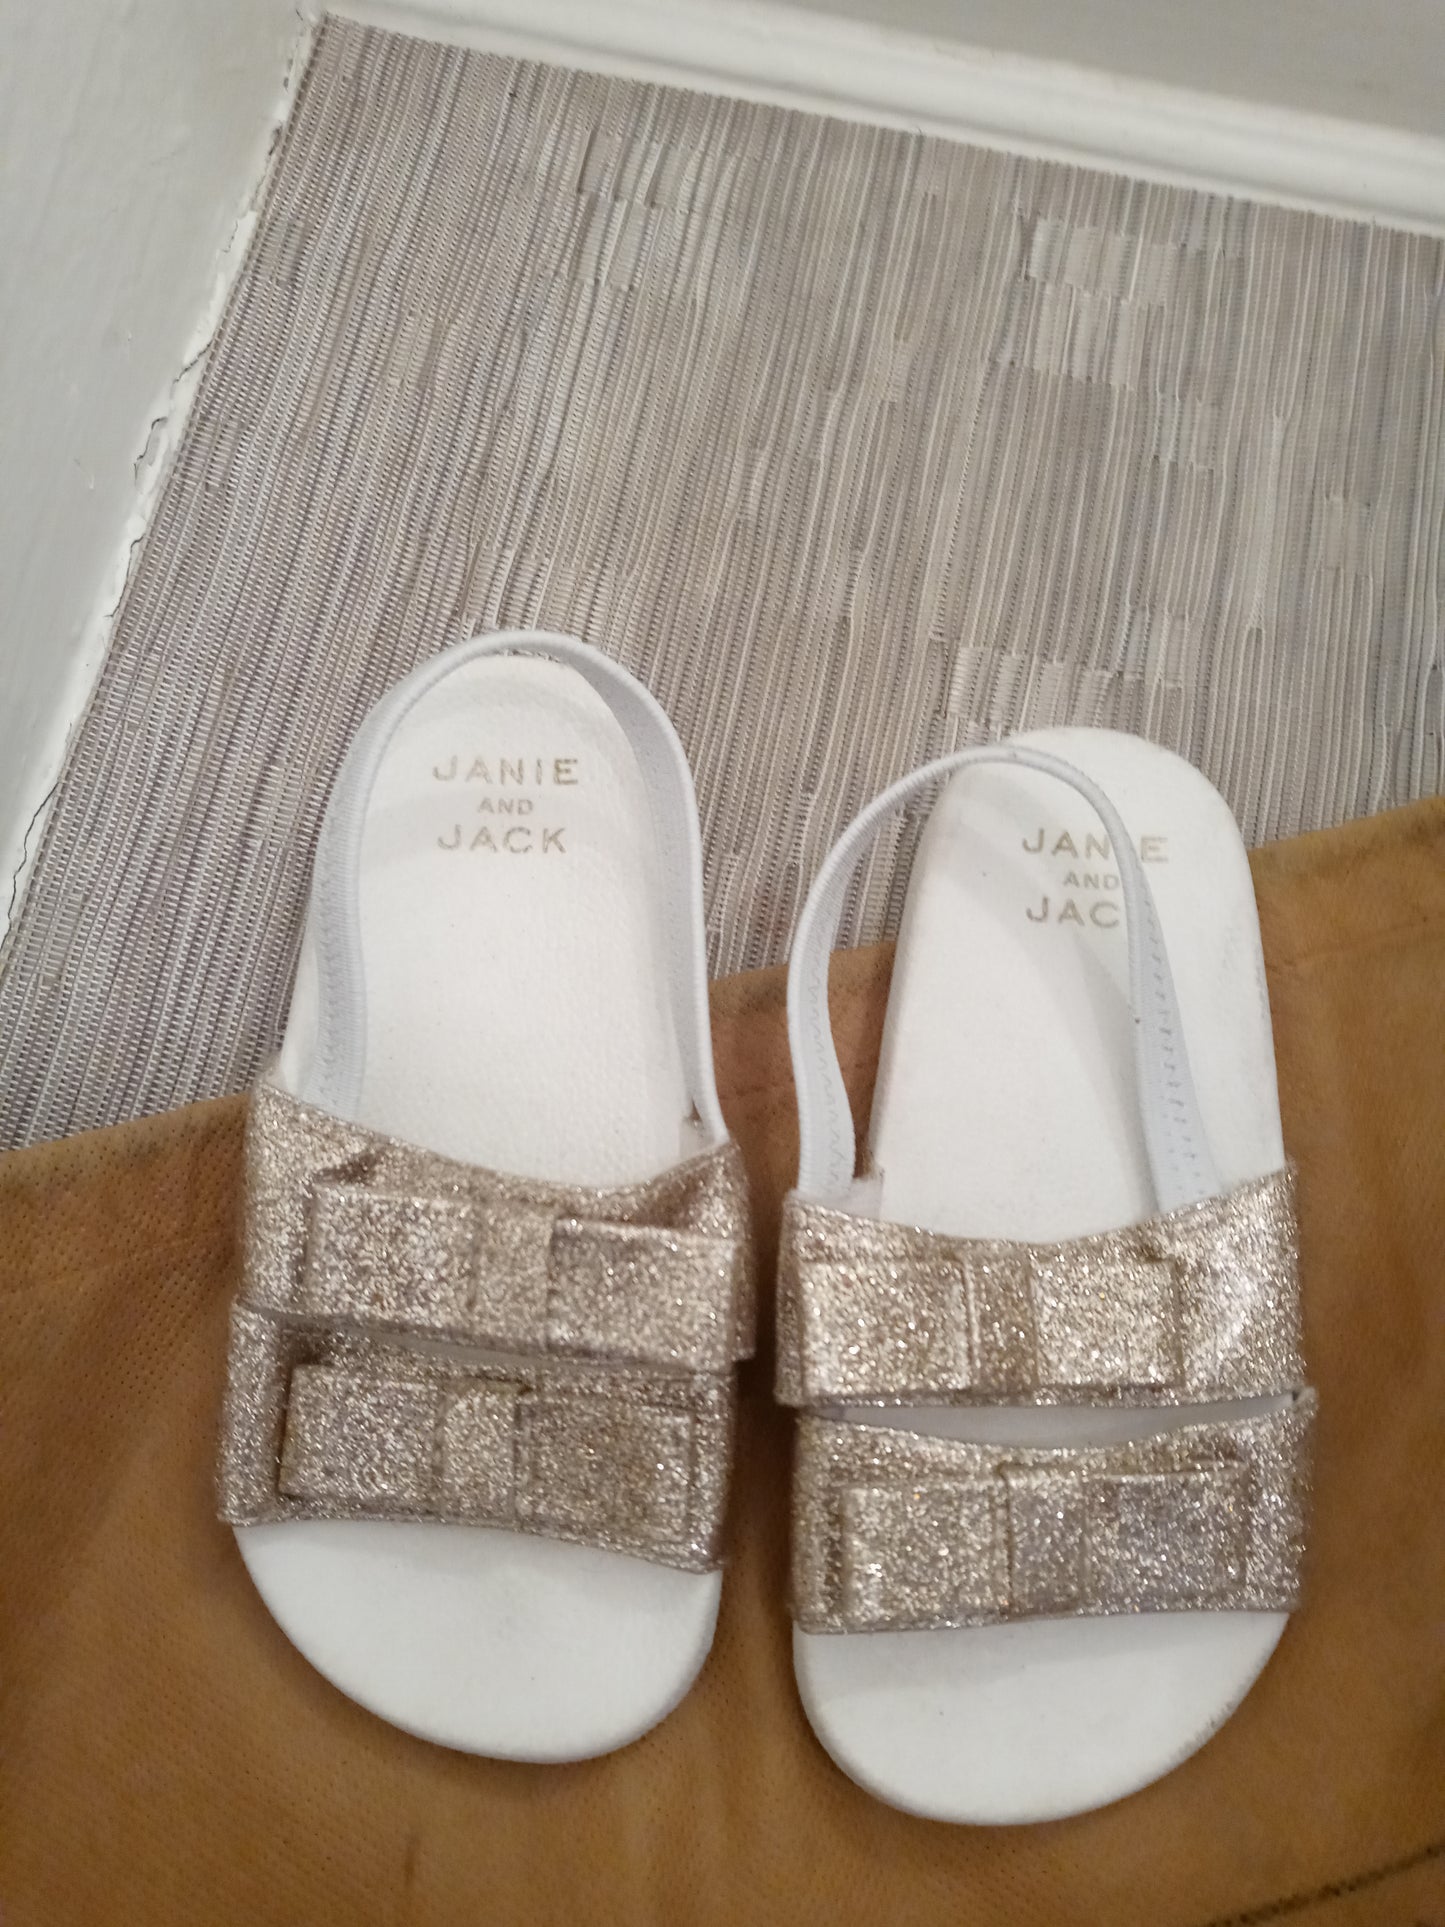 Janie and Jack Girl's Toddler Sandal Shoe's